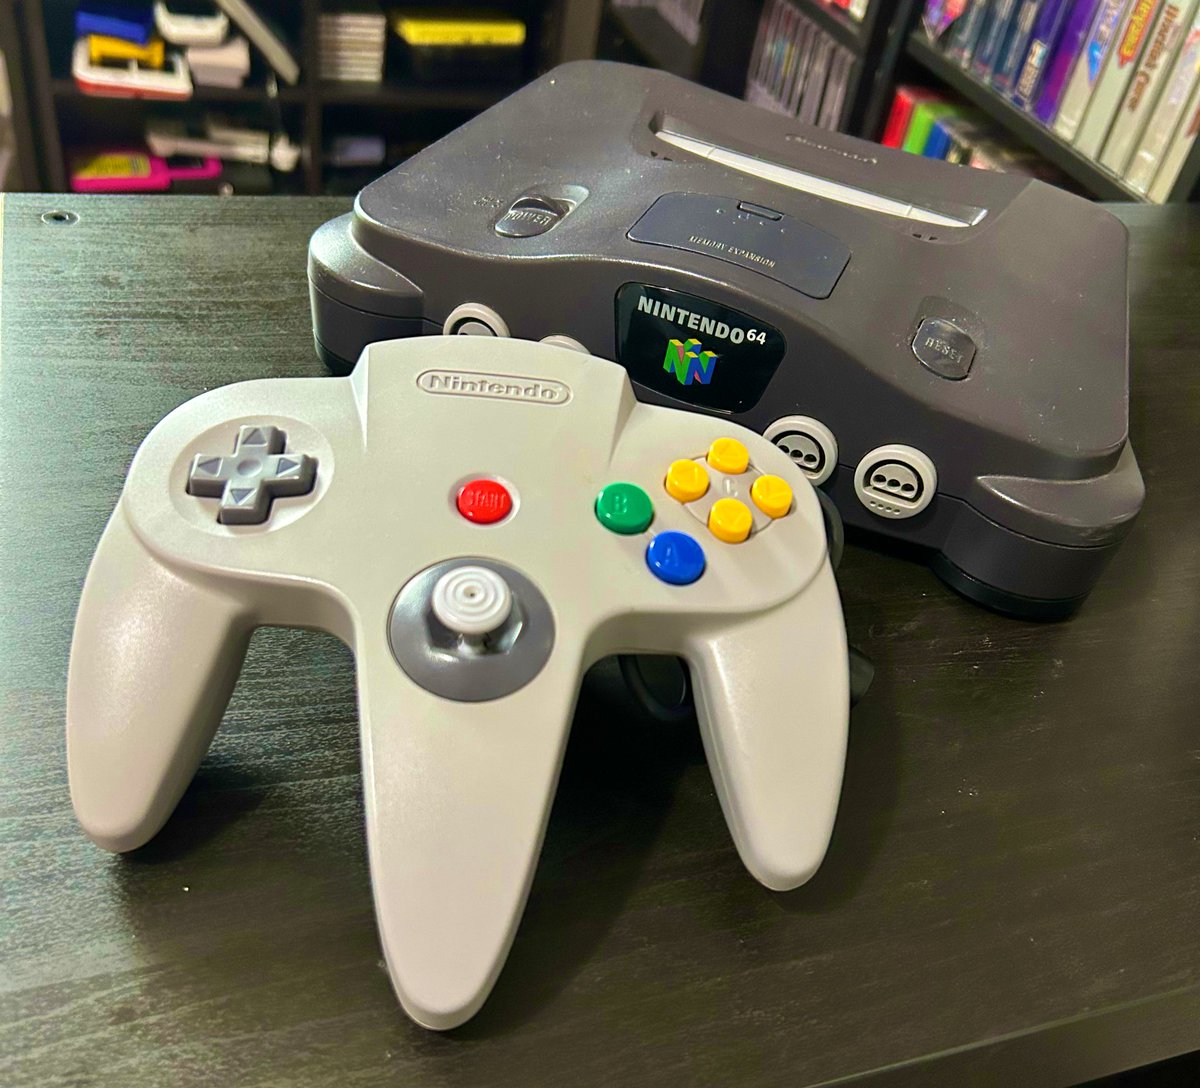 What was the first game you played on Nintendo 64?